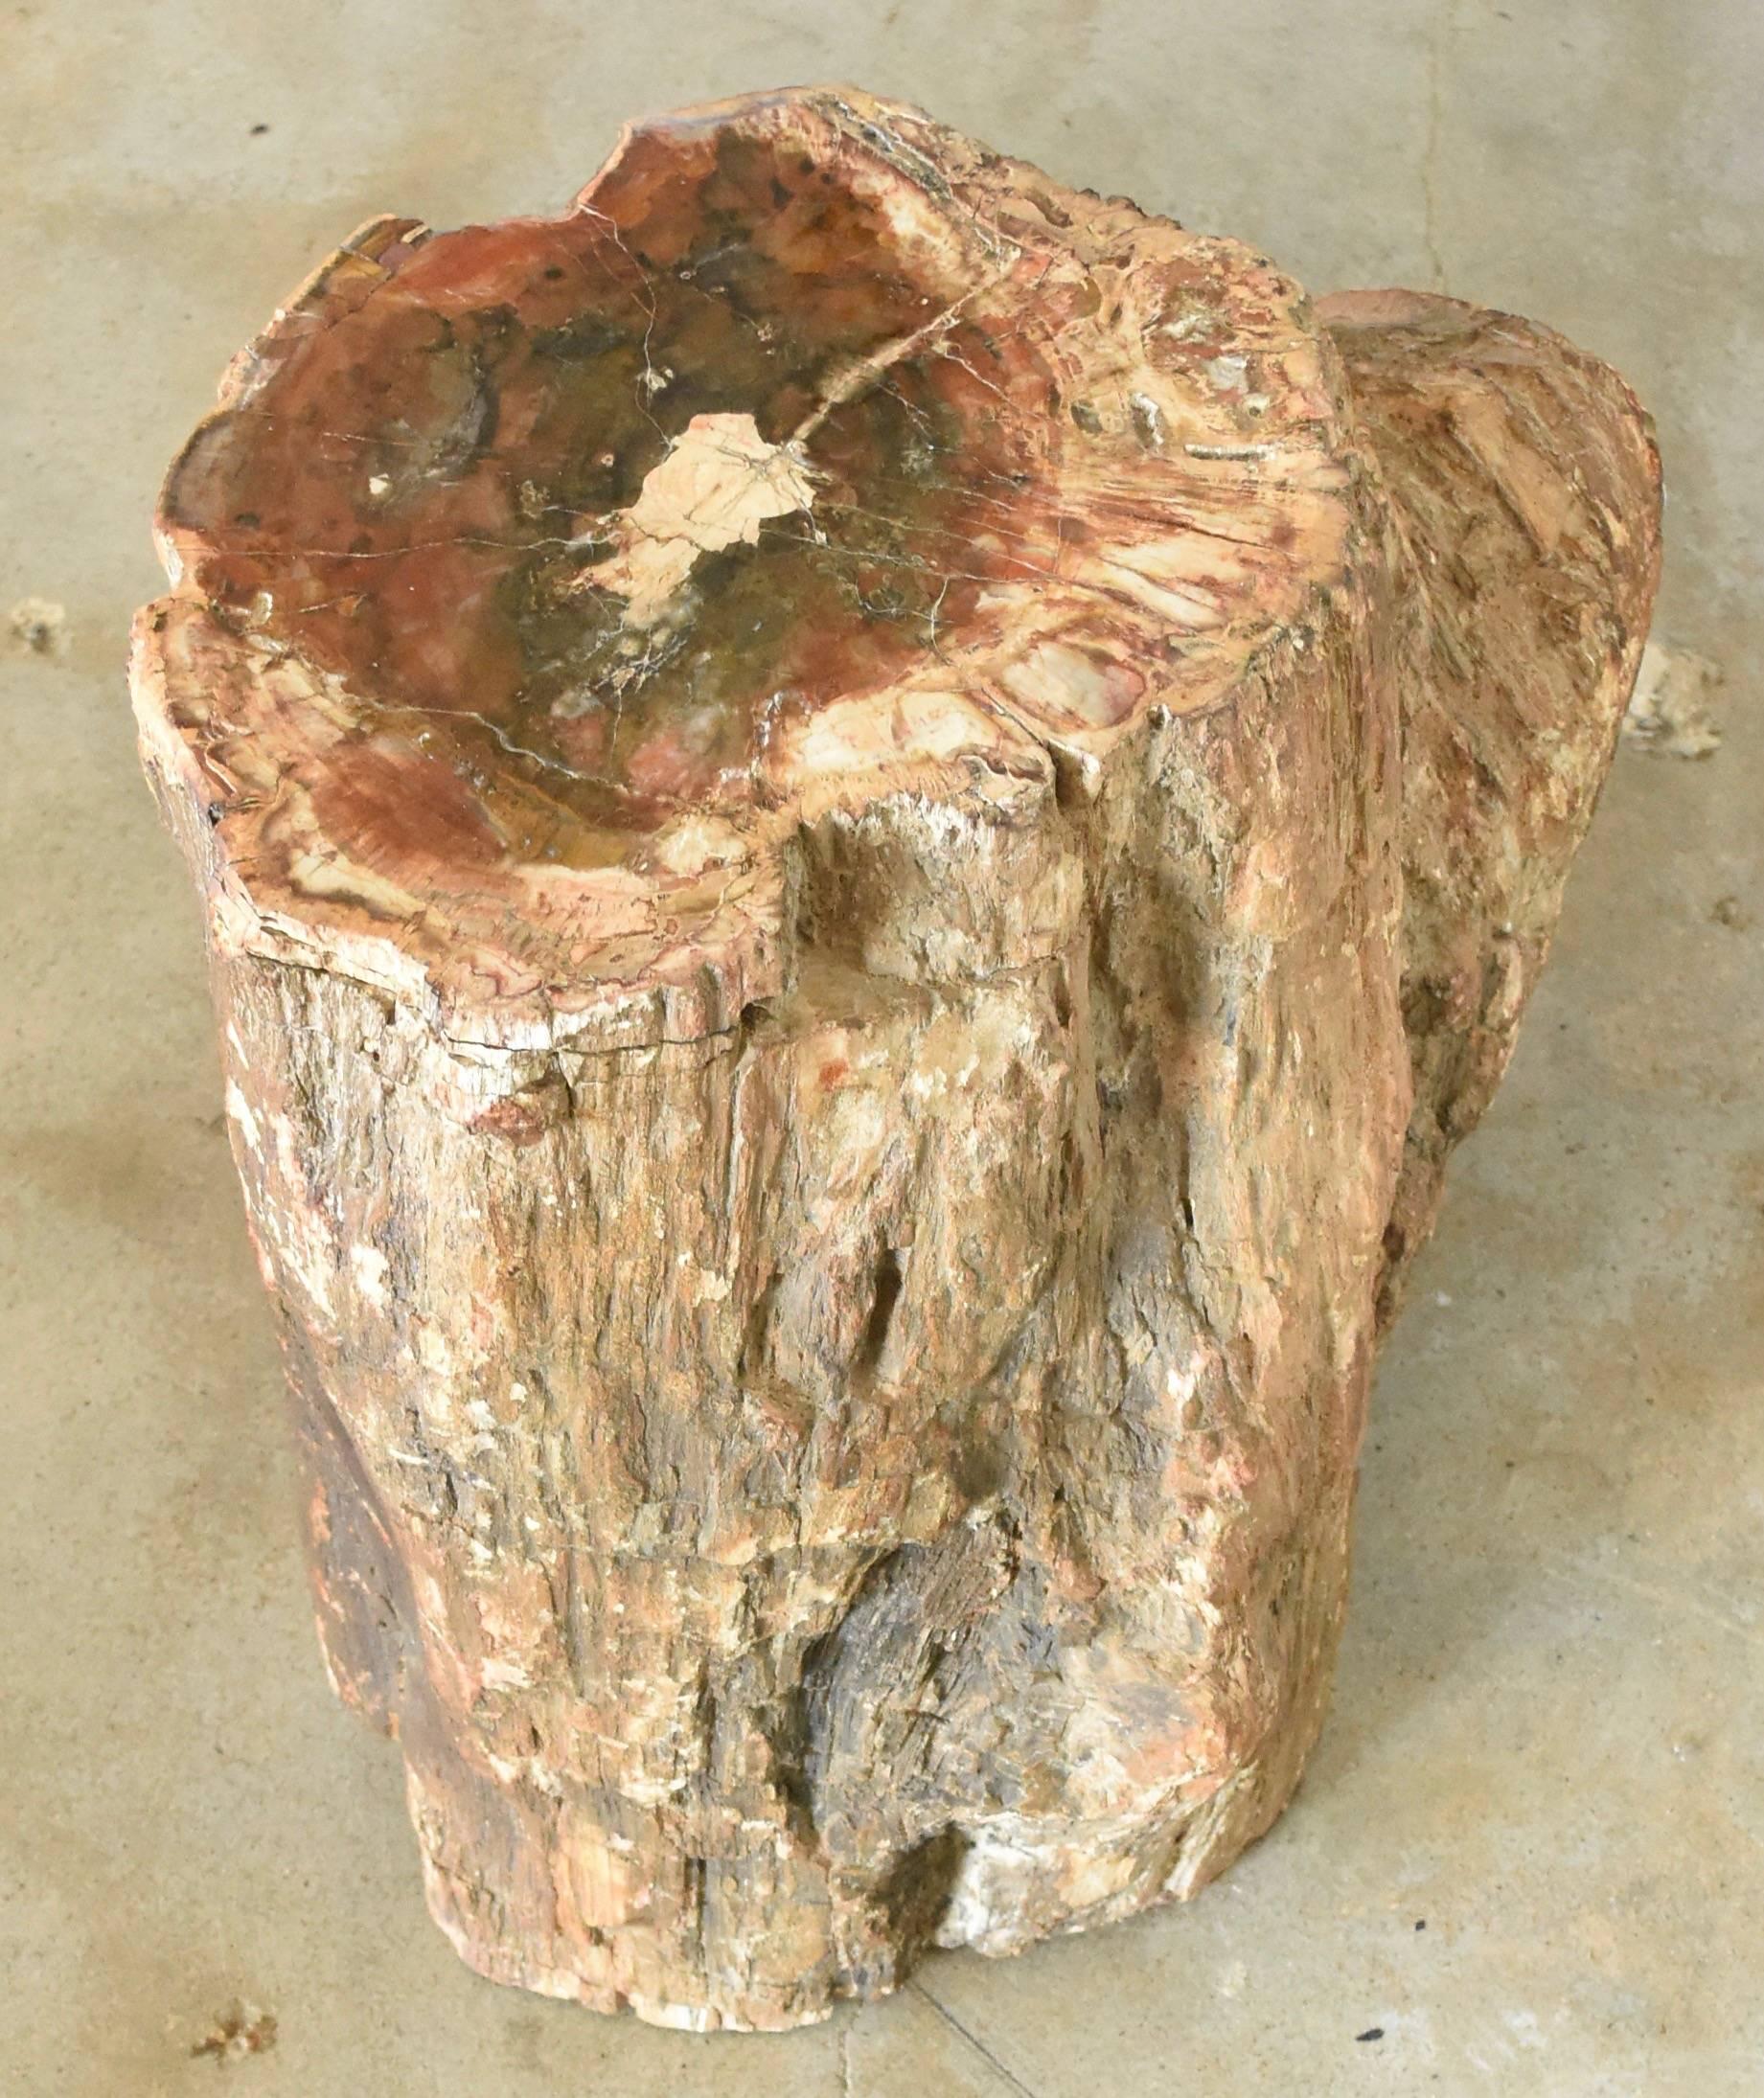 This is one of the prettiest, ancient petrified wood stumps that we have ever been able to find. It originates from the Island of Madagascar, off the coast of Africa. Look at the beautiful details of the character of this piece. It's perfect for a